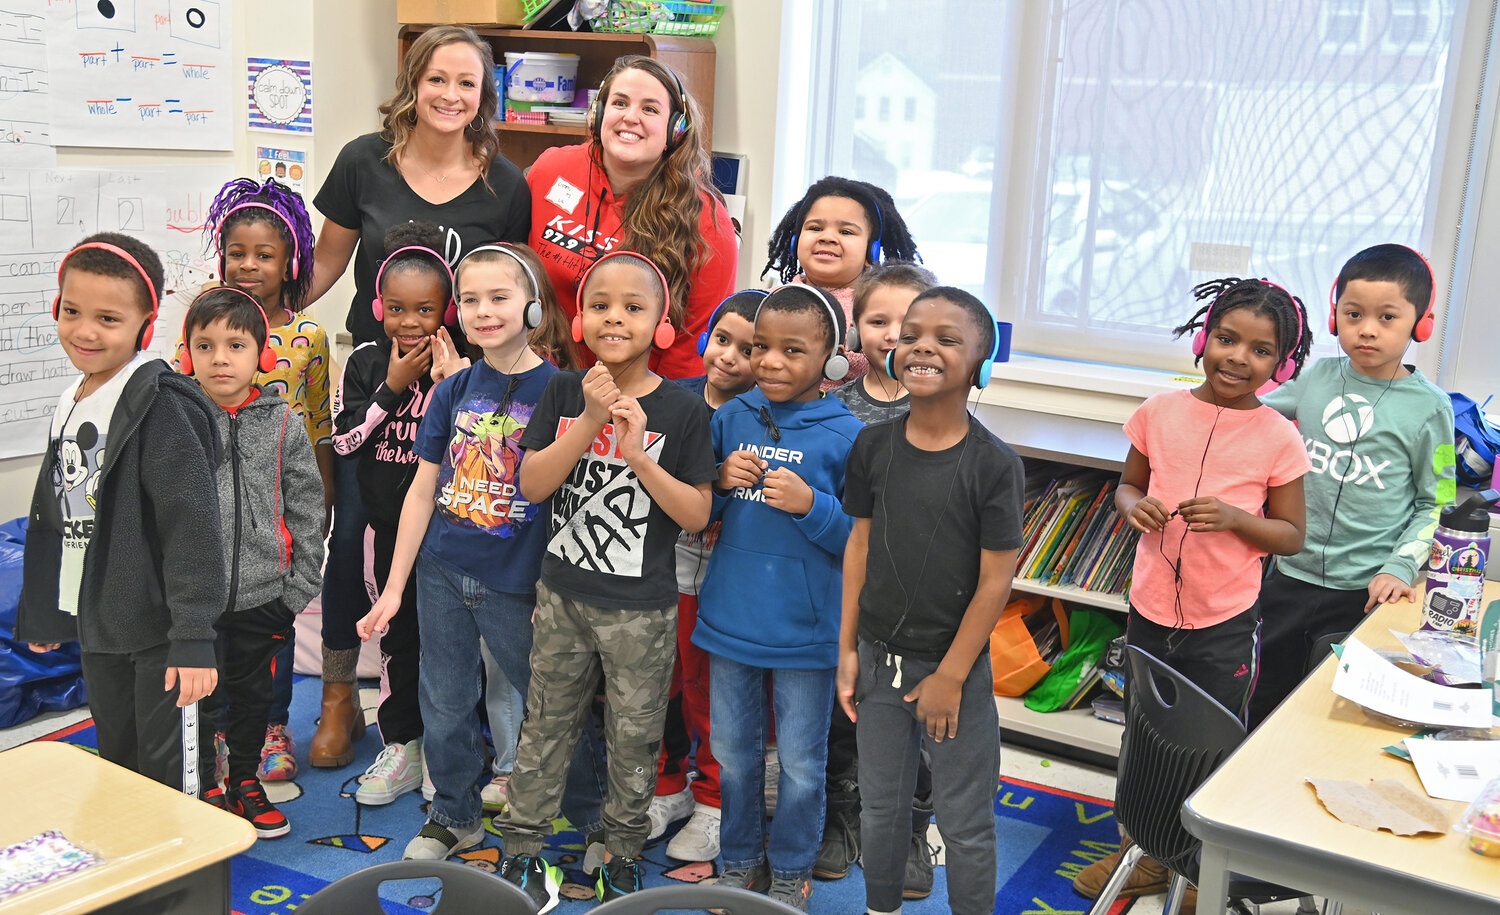 Teacher Jordyn Dunlap and her class pose with Liz Ellis from Kiss FM after the radio personality read a book to Dunlap's class Friday, March 24 at Kernan Elementary School in Utica.